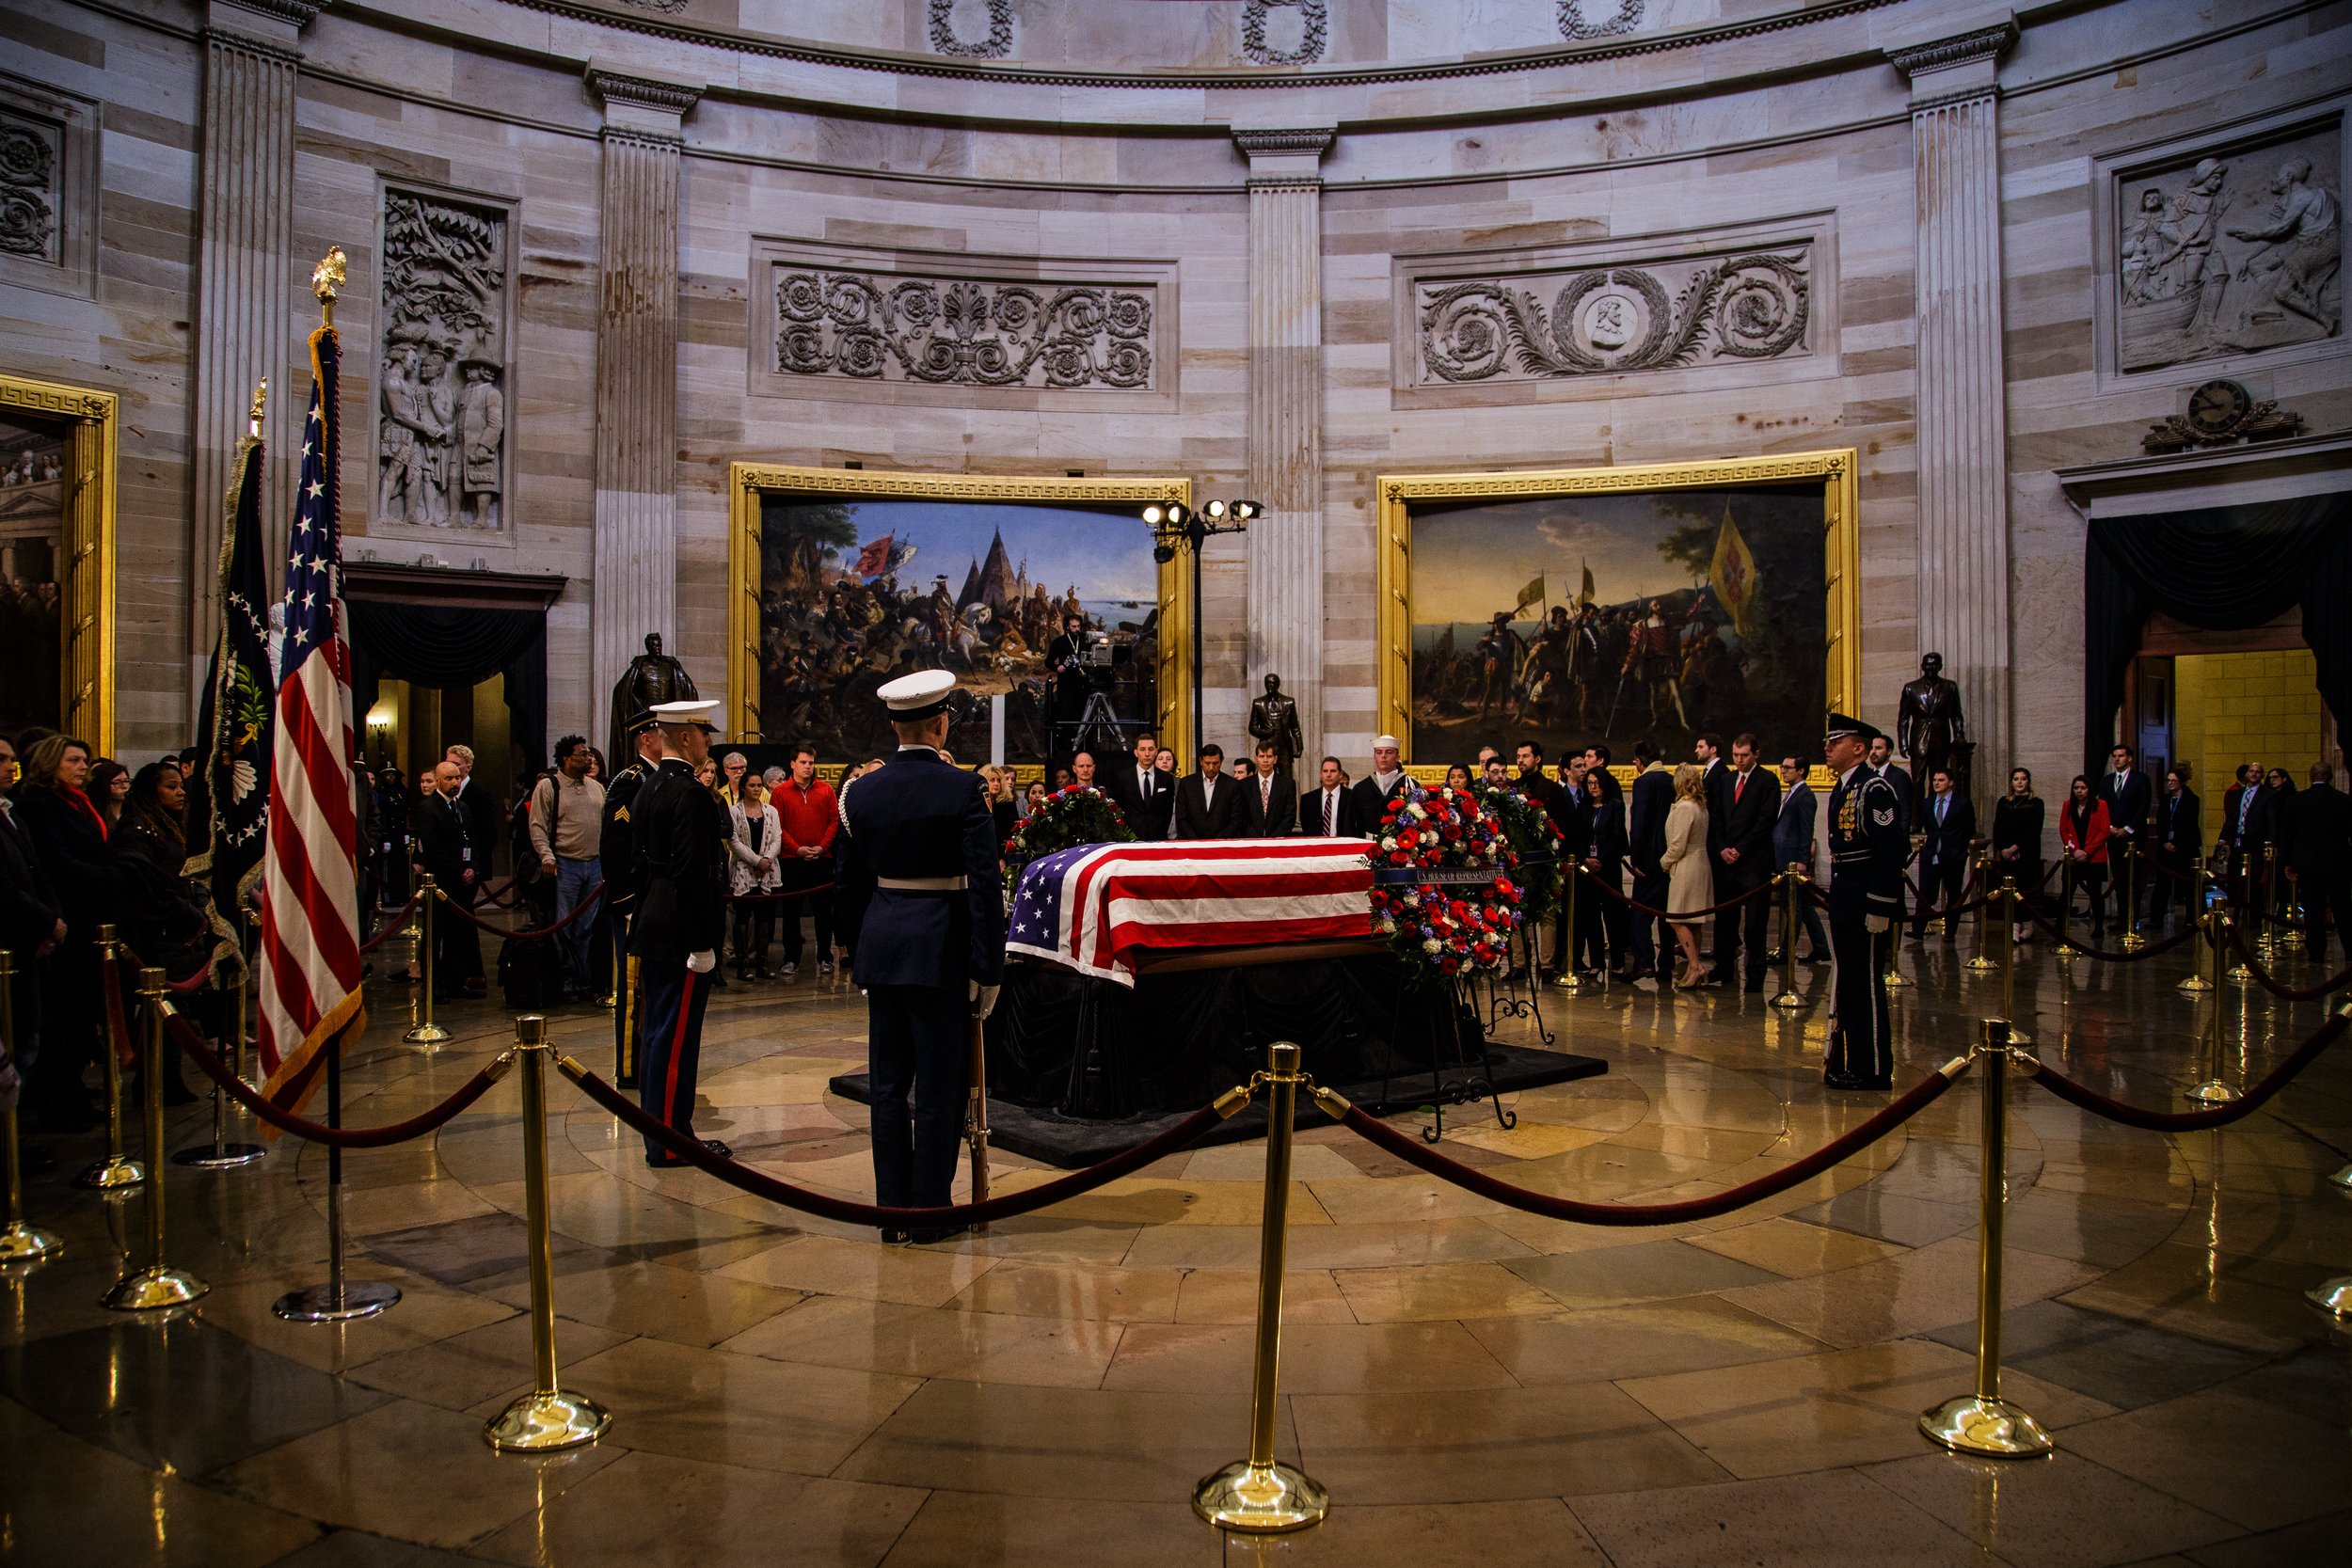  The body of George H.W. Bush lies in state in the Capitol rotunda.    December 2018   